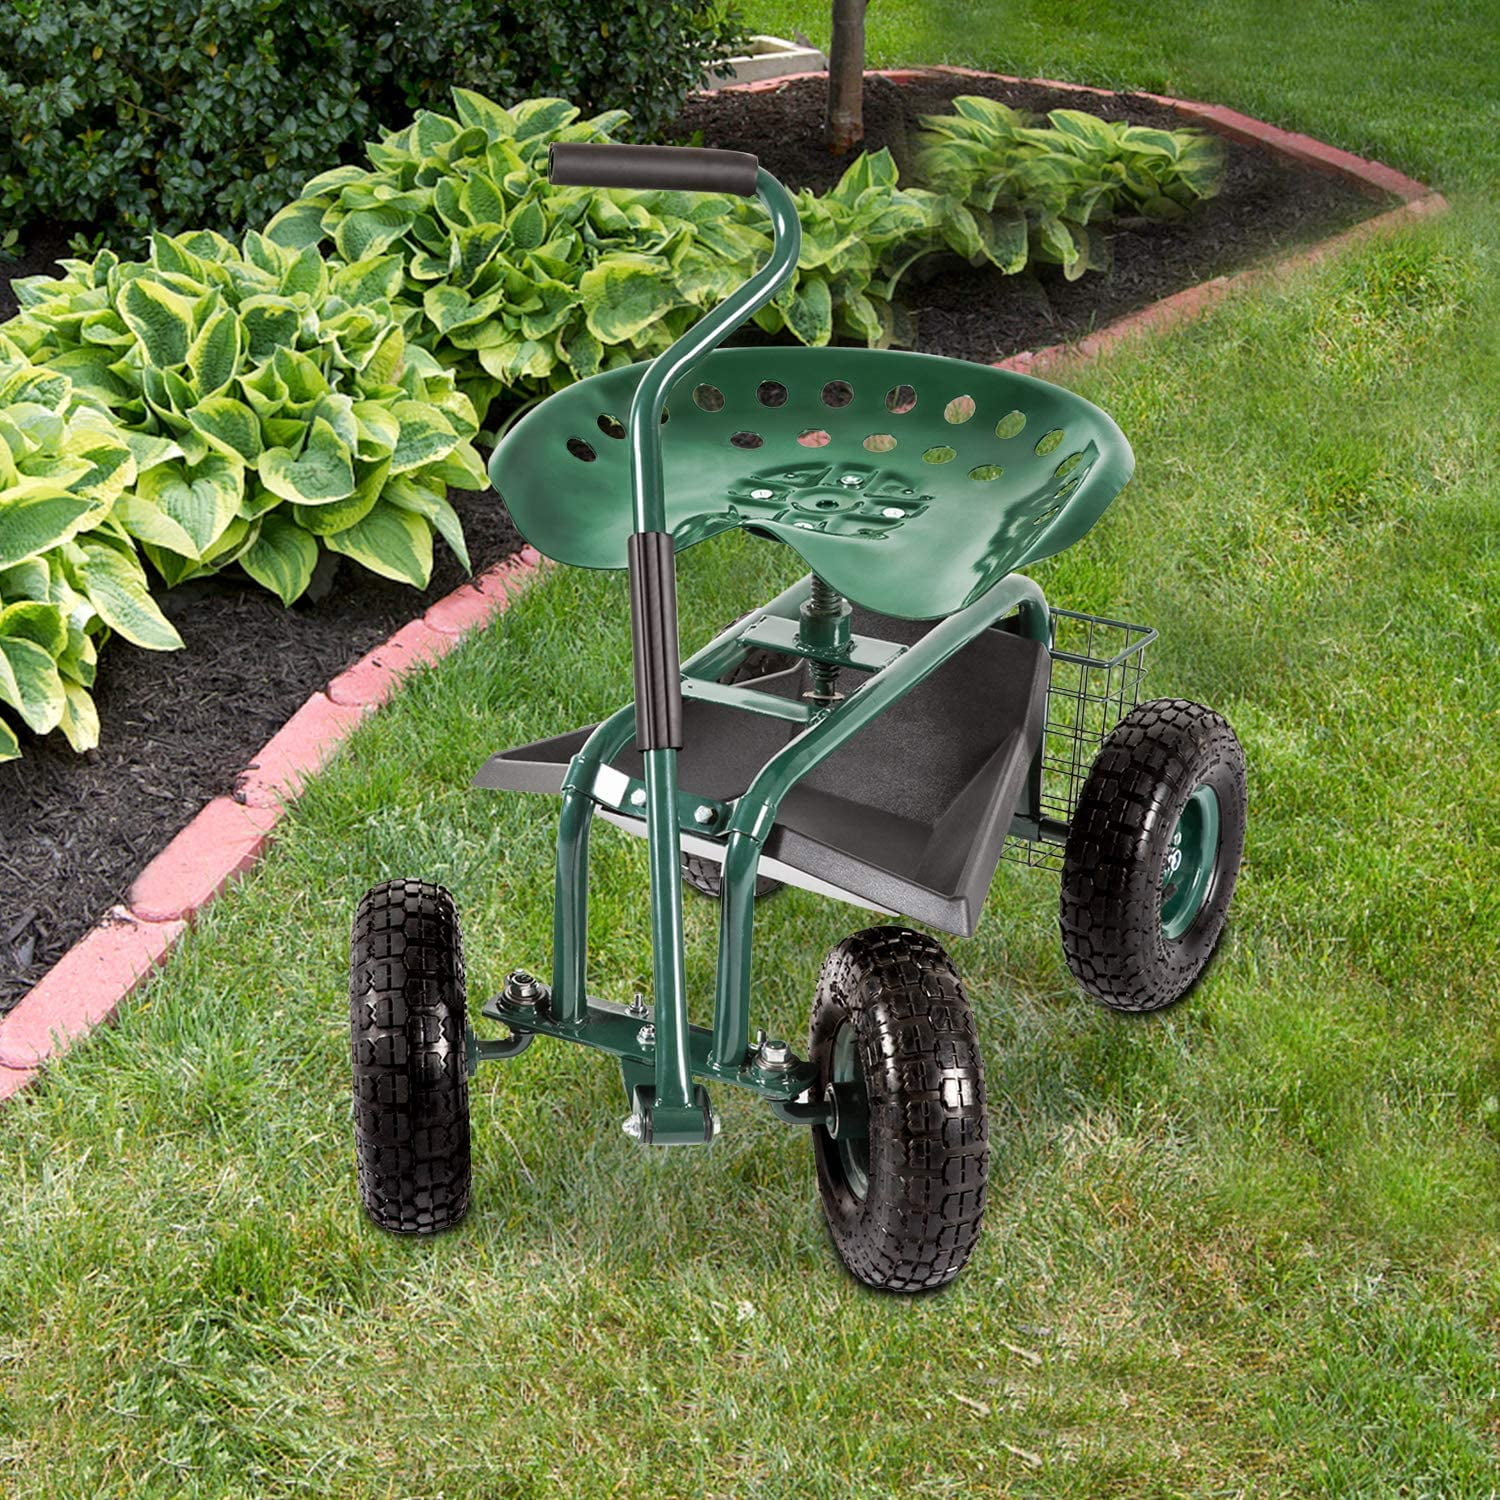 Details about   Rolling Garden Cart Tool Storage Basket Swivel Seat Planting Tray Work 330lbs 